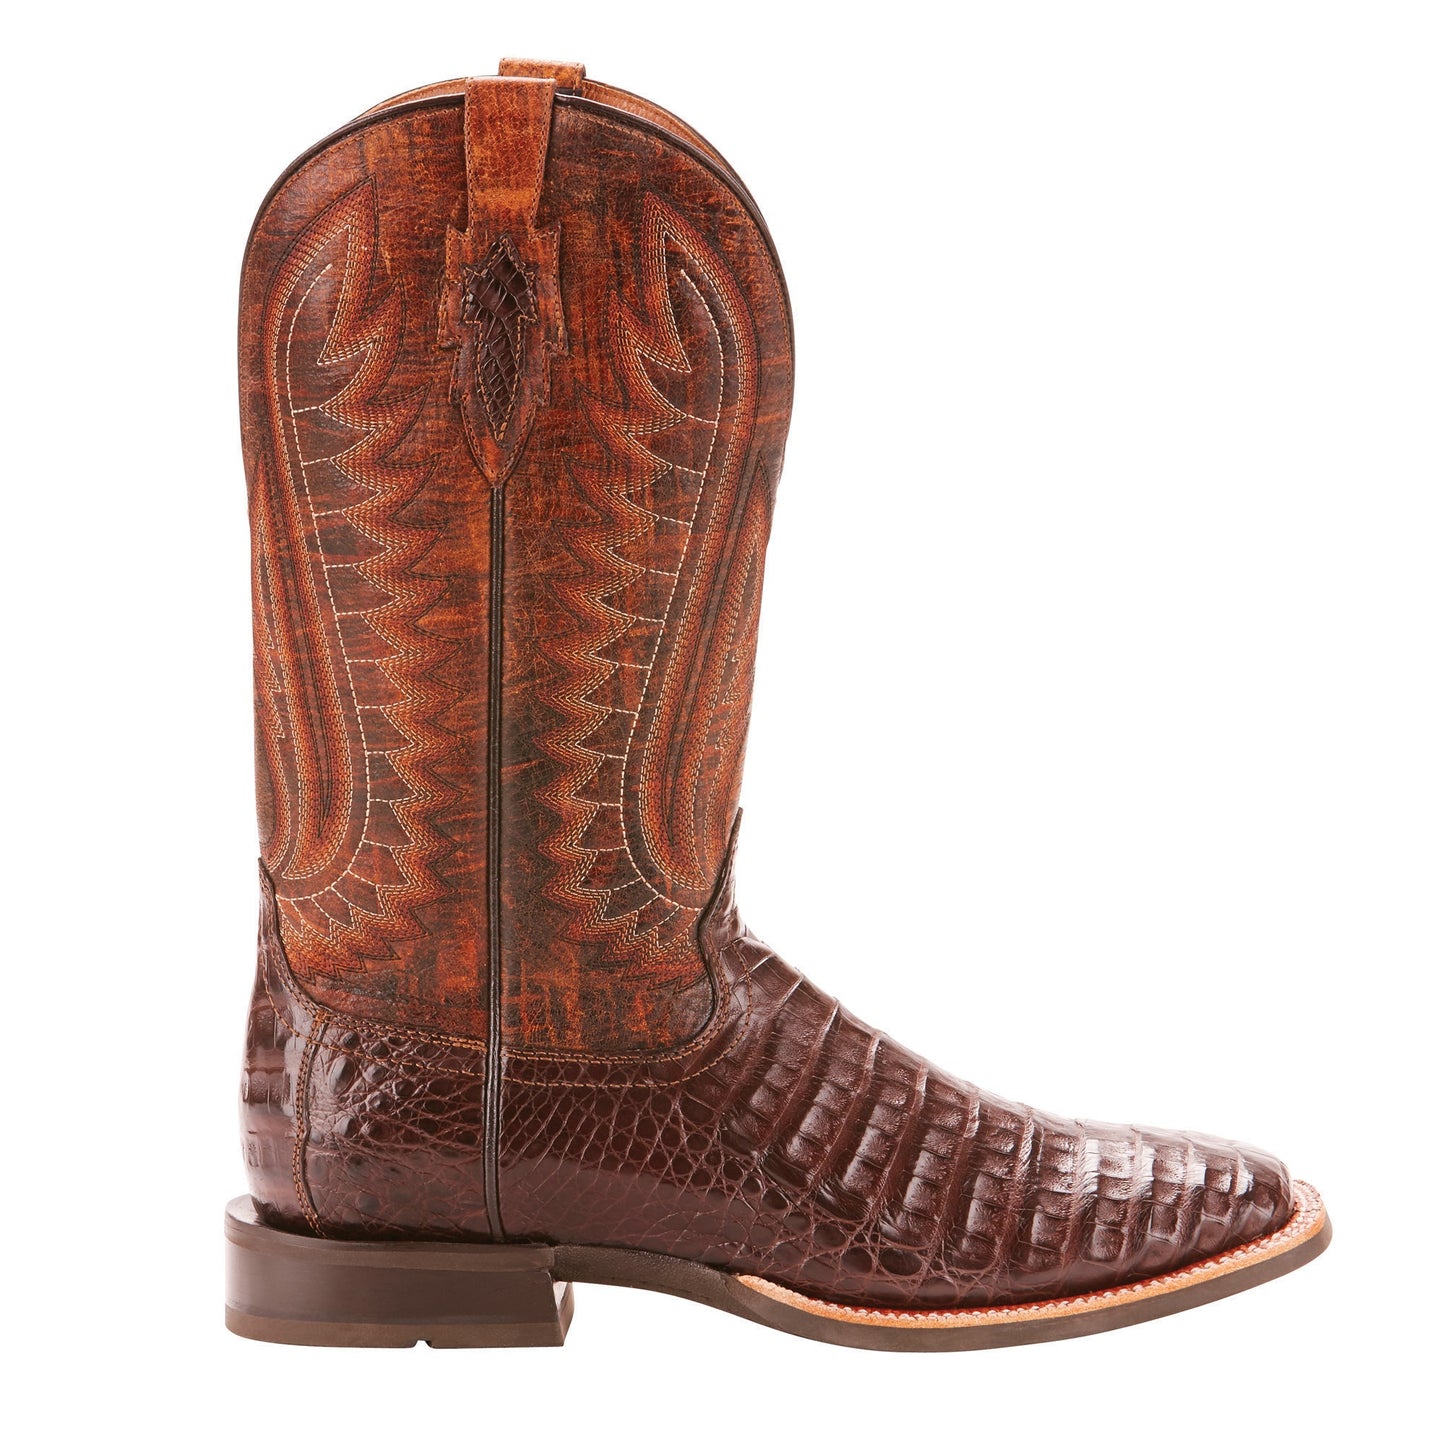 Ariat® Men's Double Down Caiman Belly Wide Square Toe Boots 10025088 - Wild West Boot Store